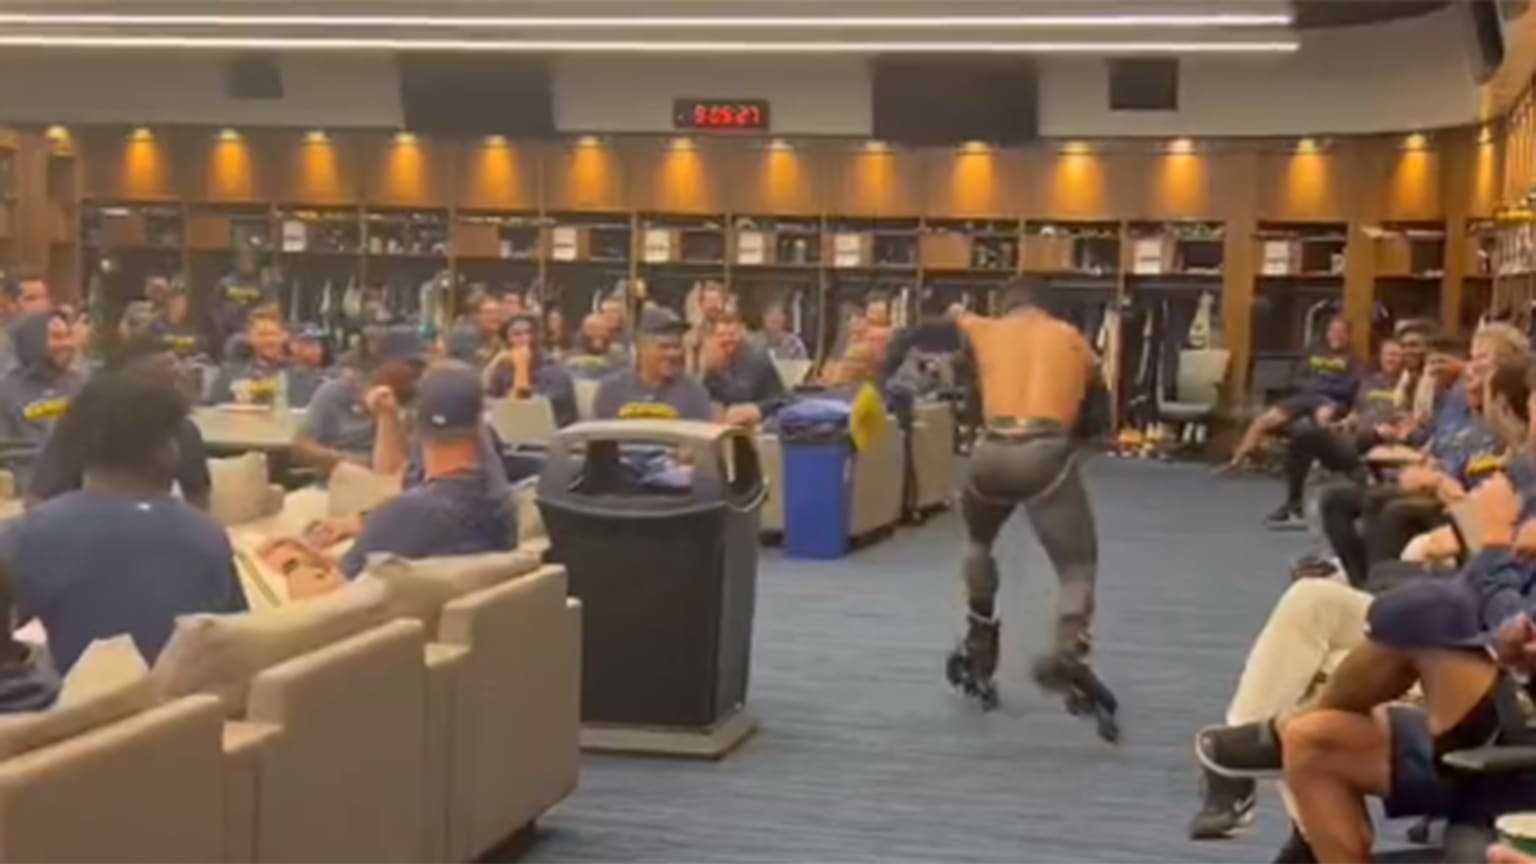 A man skating around a clubhouse with other players watching from their seats